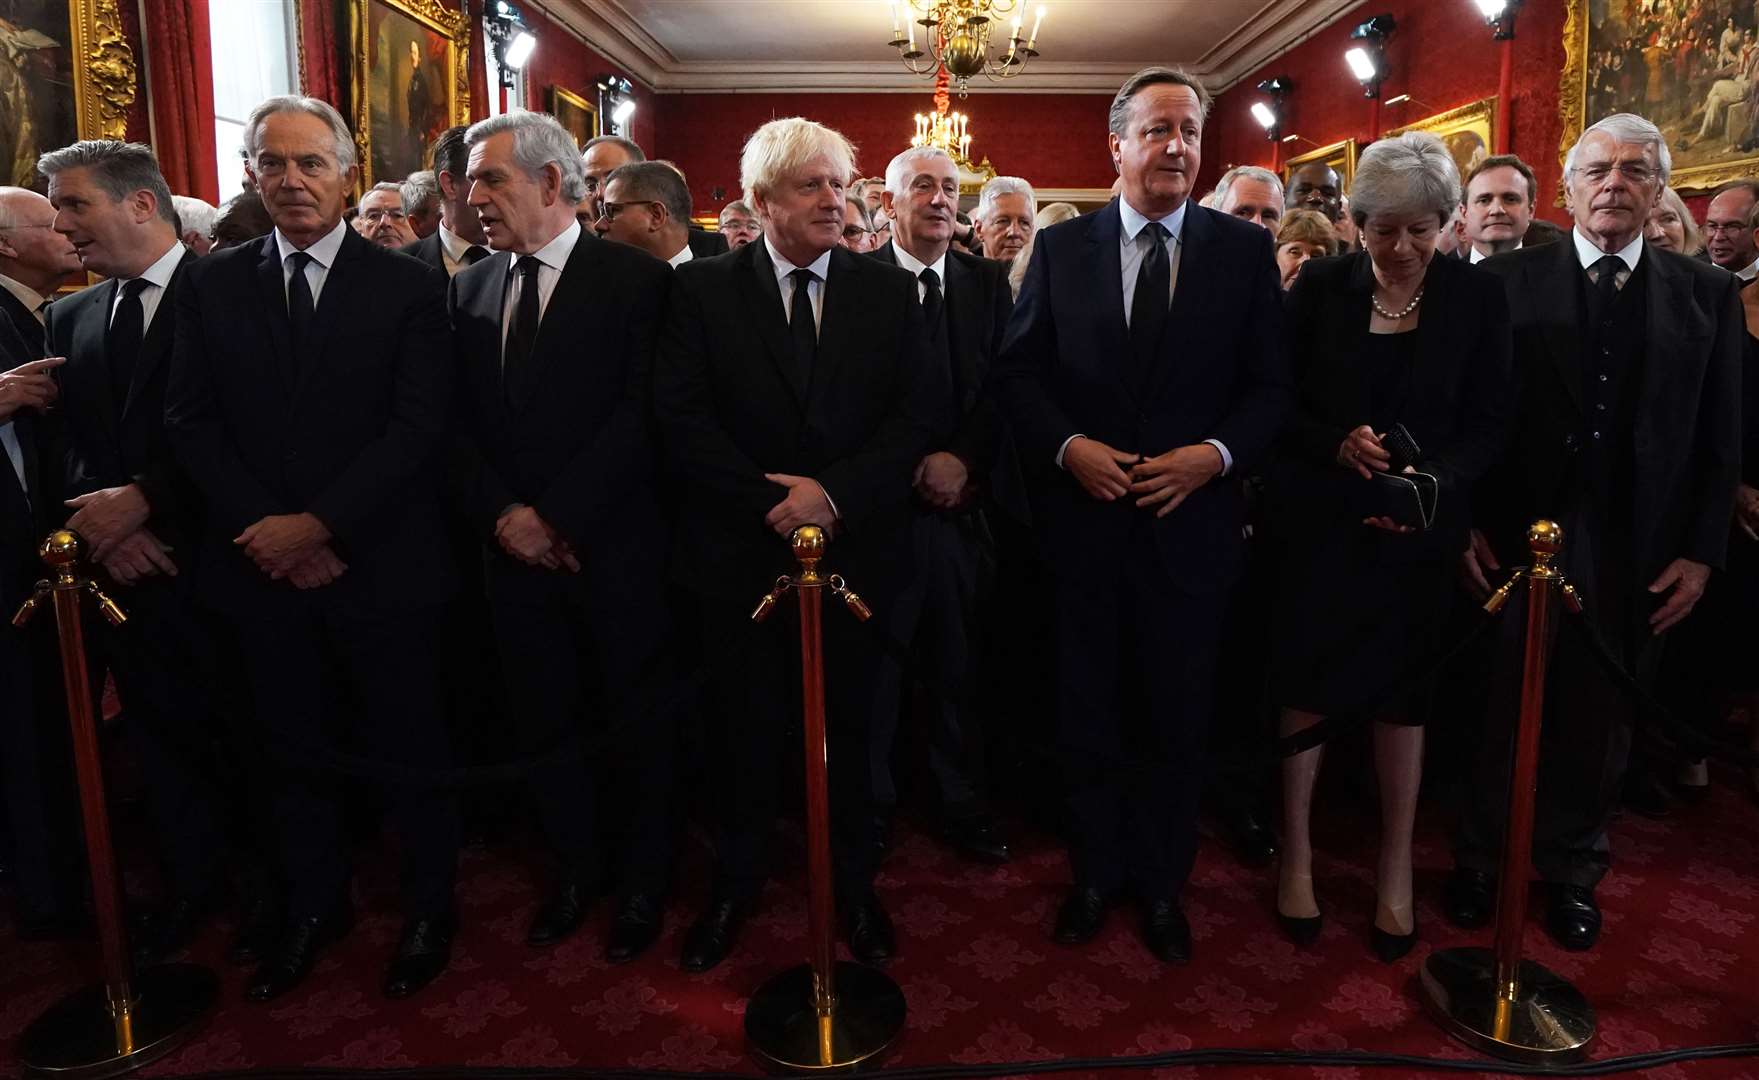 From left: Labour leader Sir Keir Starmer with former prime ministers Tony Blair, Gordon Brown, Boris Johnson, David Cameron, Theresa May and John Major at the Accession Council ceremony (PA)